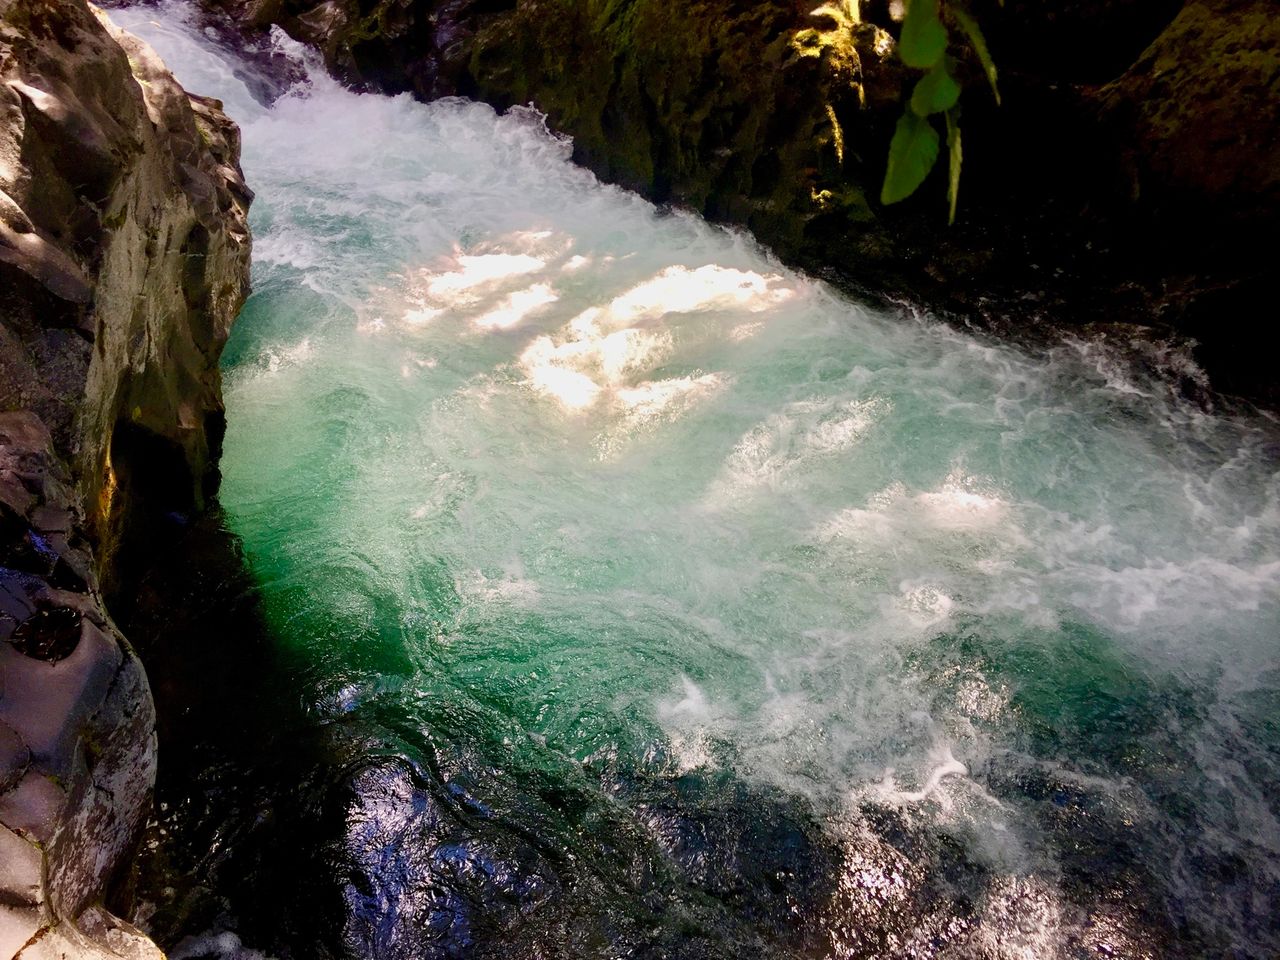 A pool of water glowing with green as the sun shines into it.